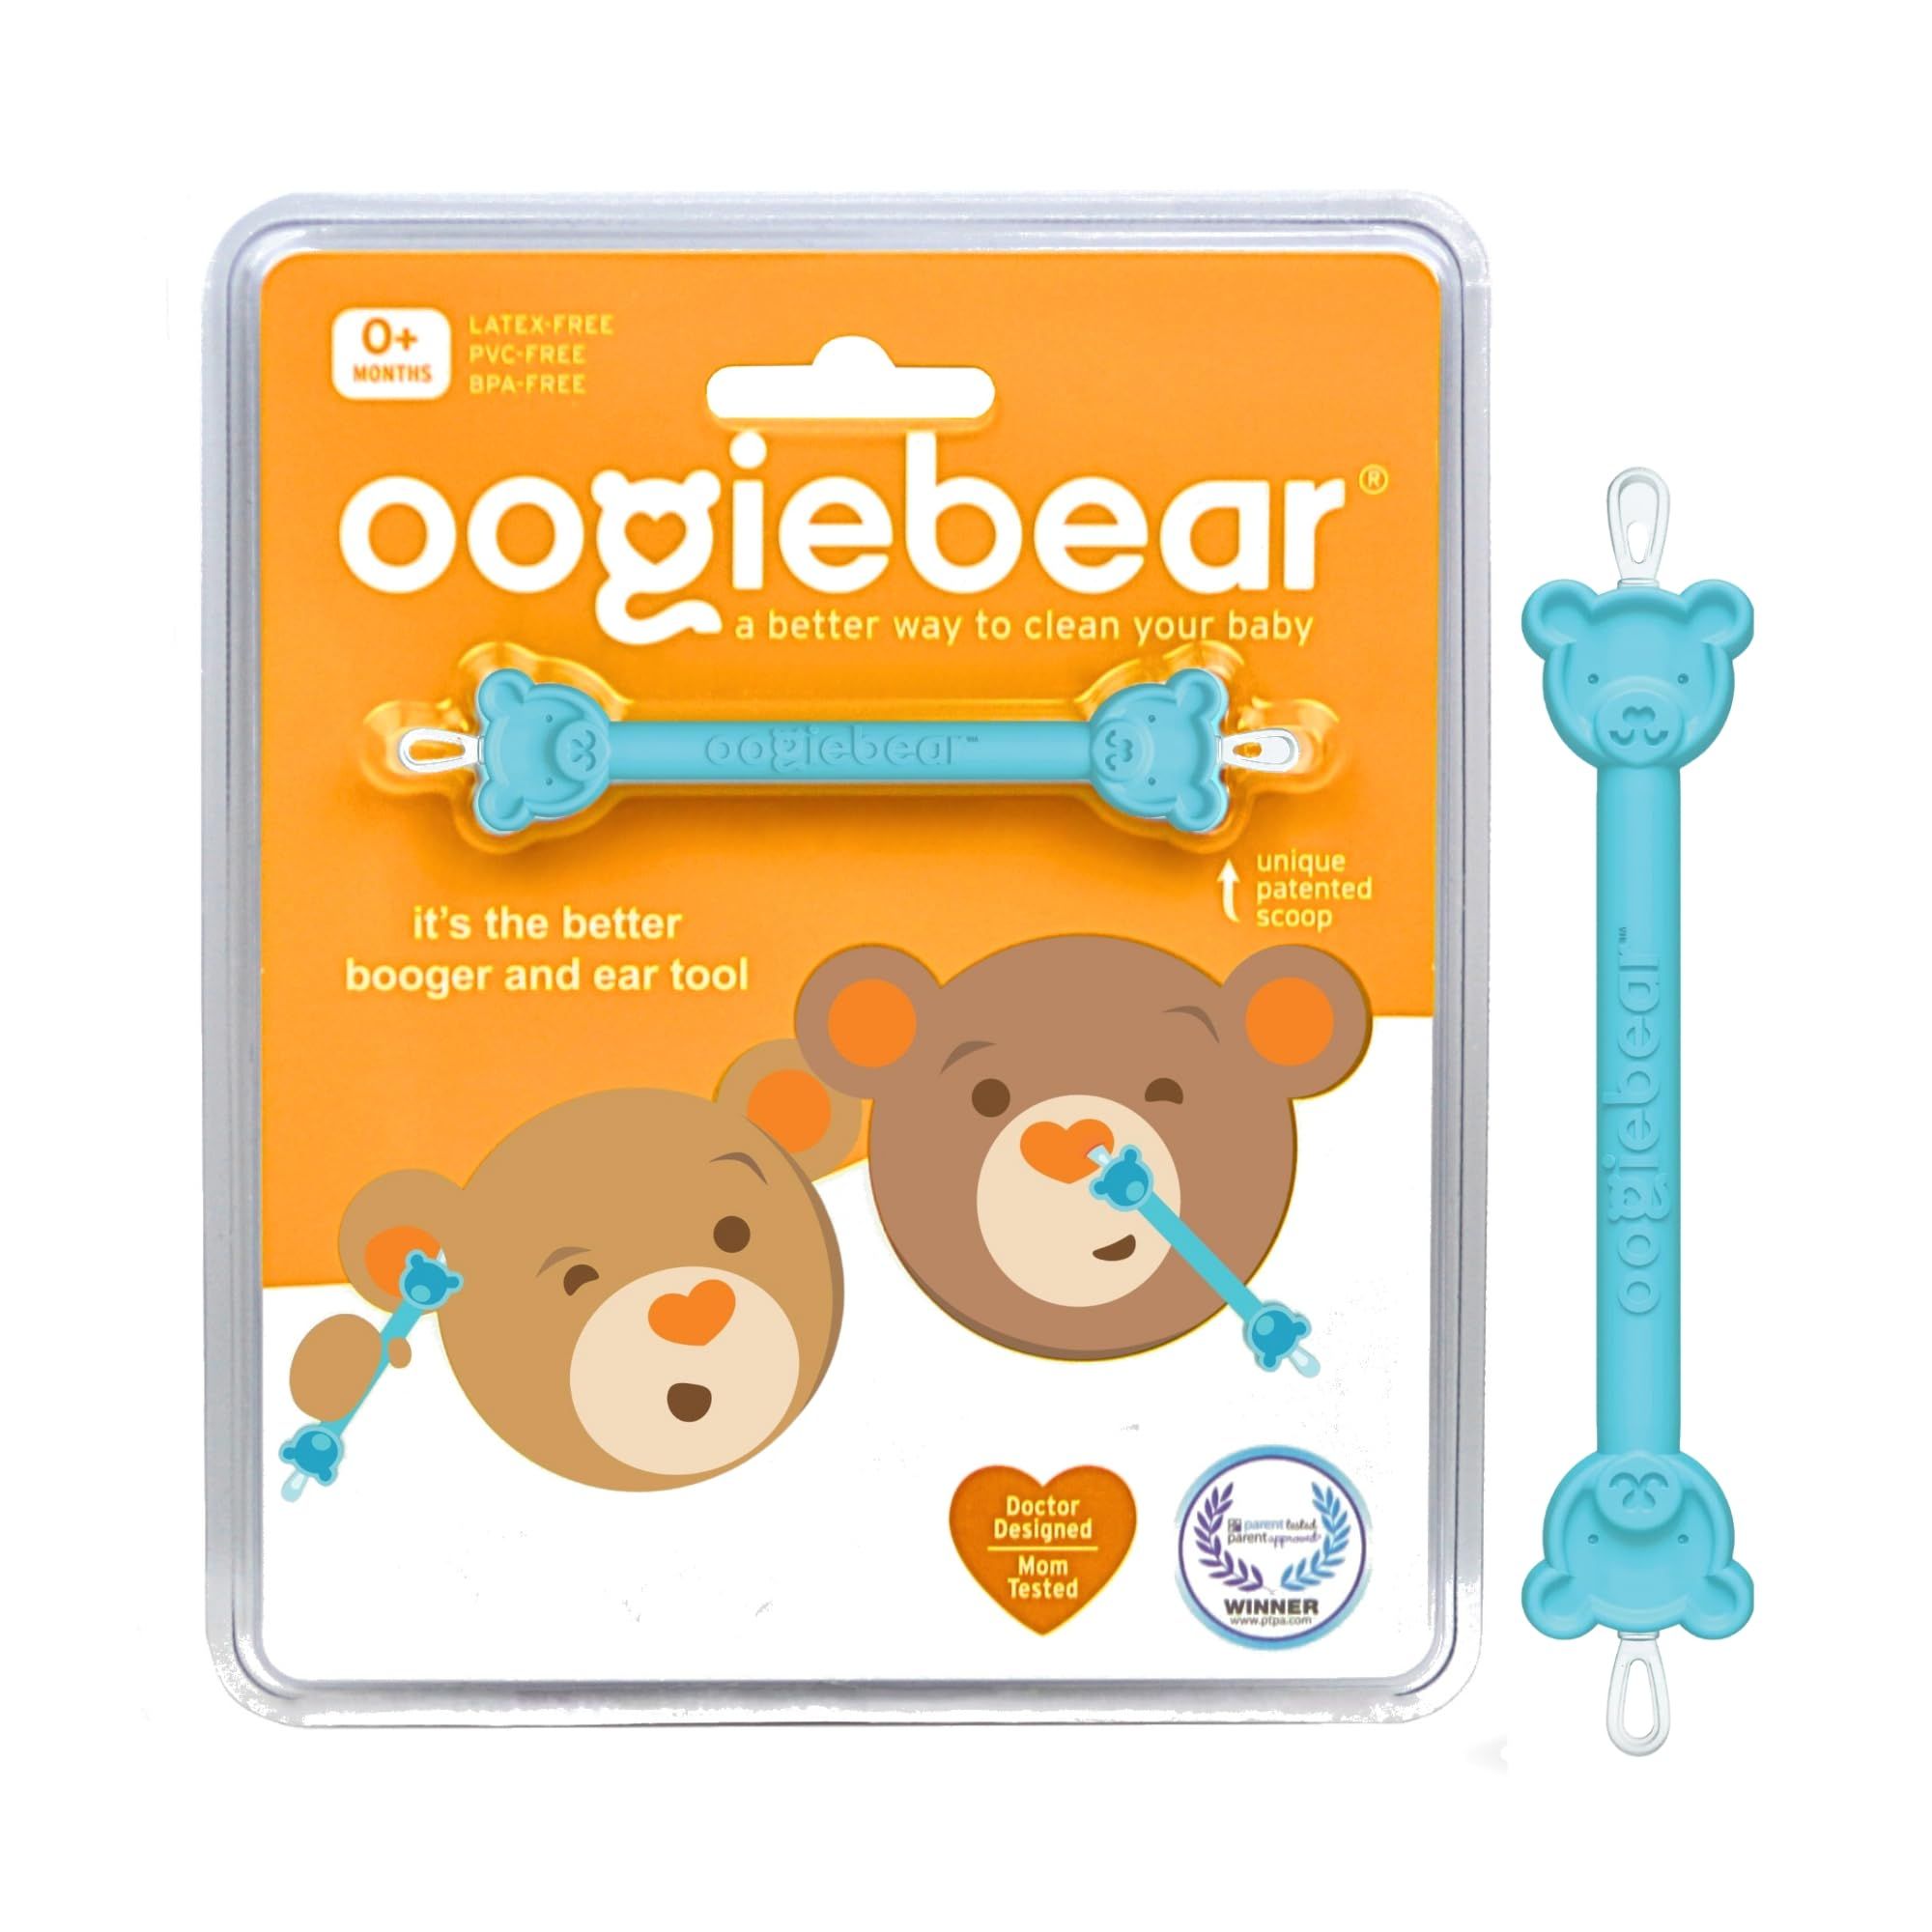 oogiebear Baby Nose Cleaner & Ear Wax Removal Tool - Safe Booger & Earwax Removal for Newborns, I... | Amazon (US)